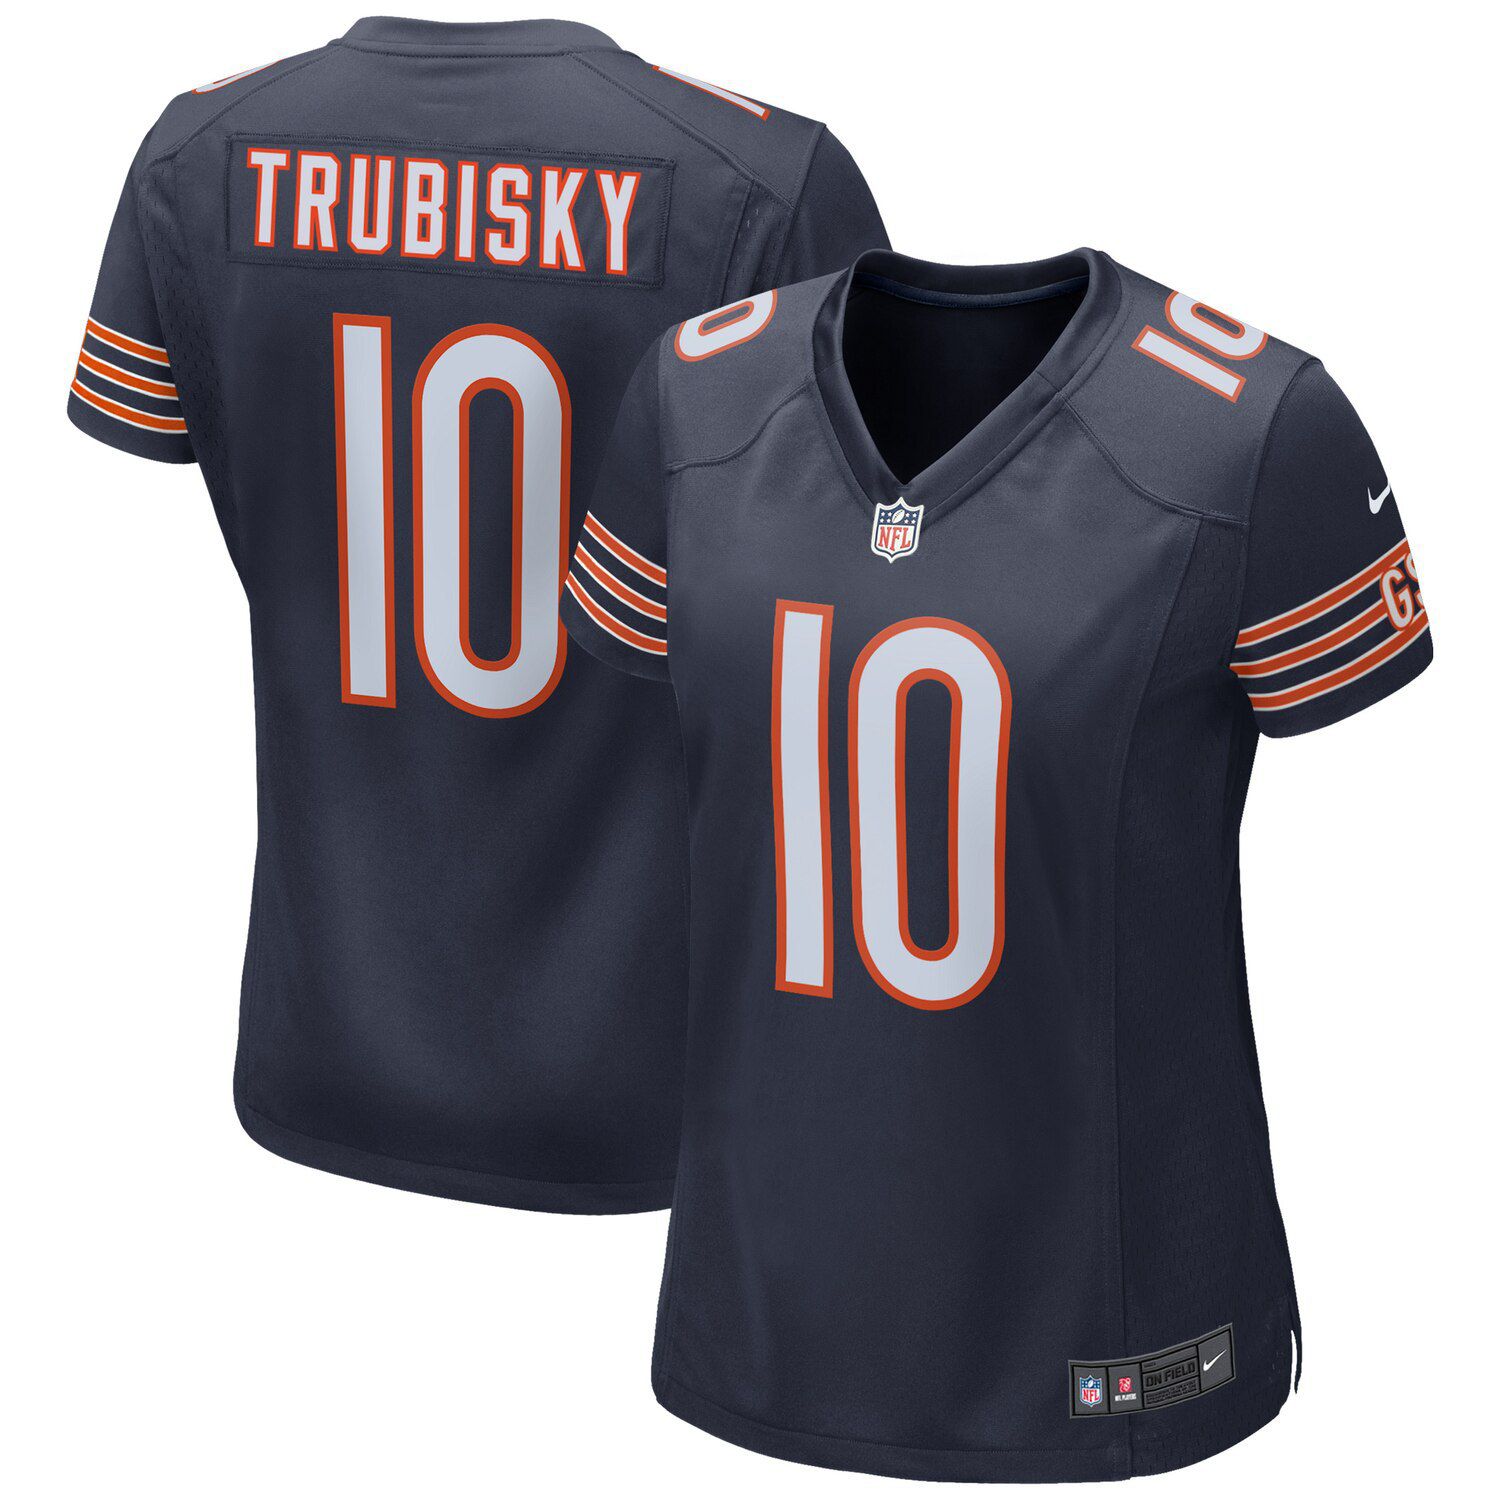 chicago bears jerseys over the years